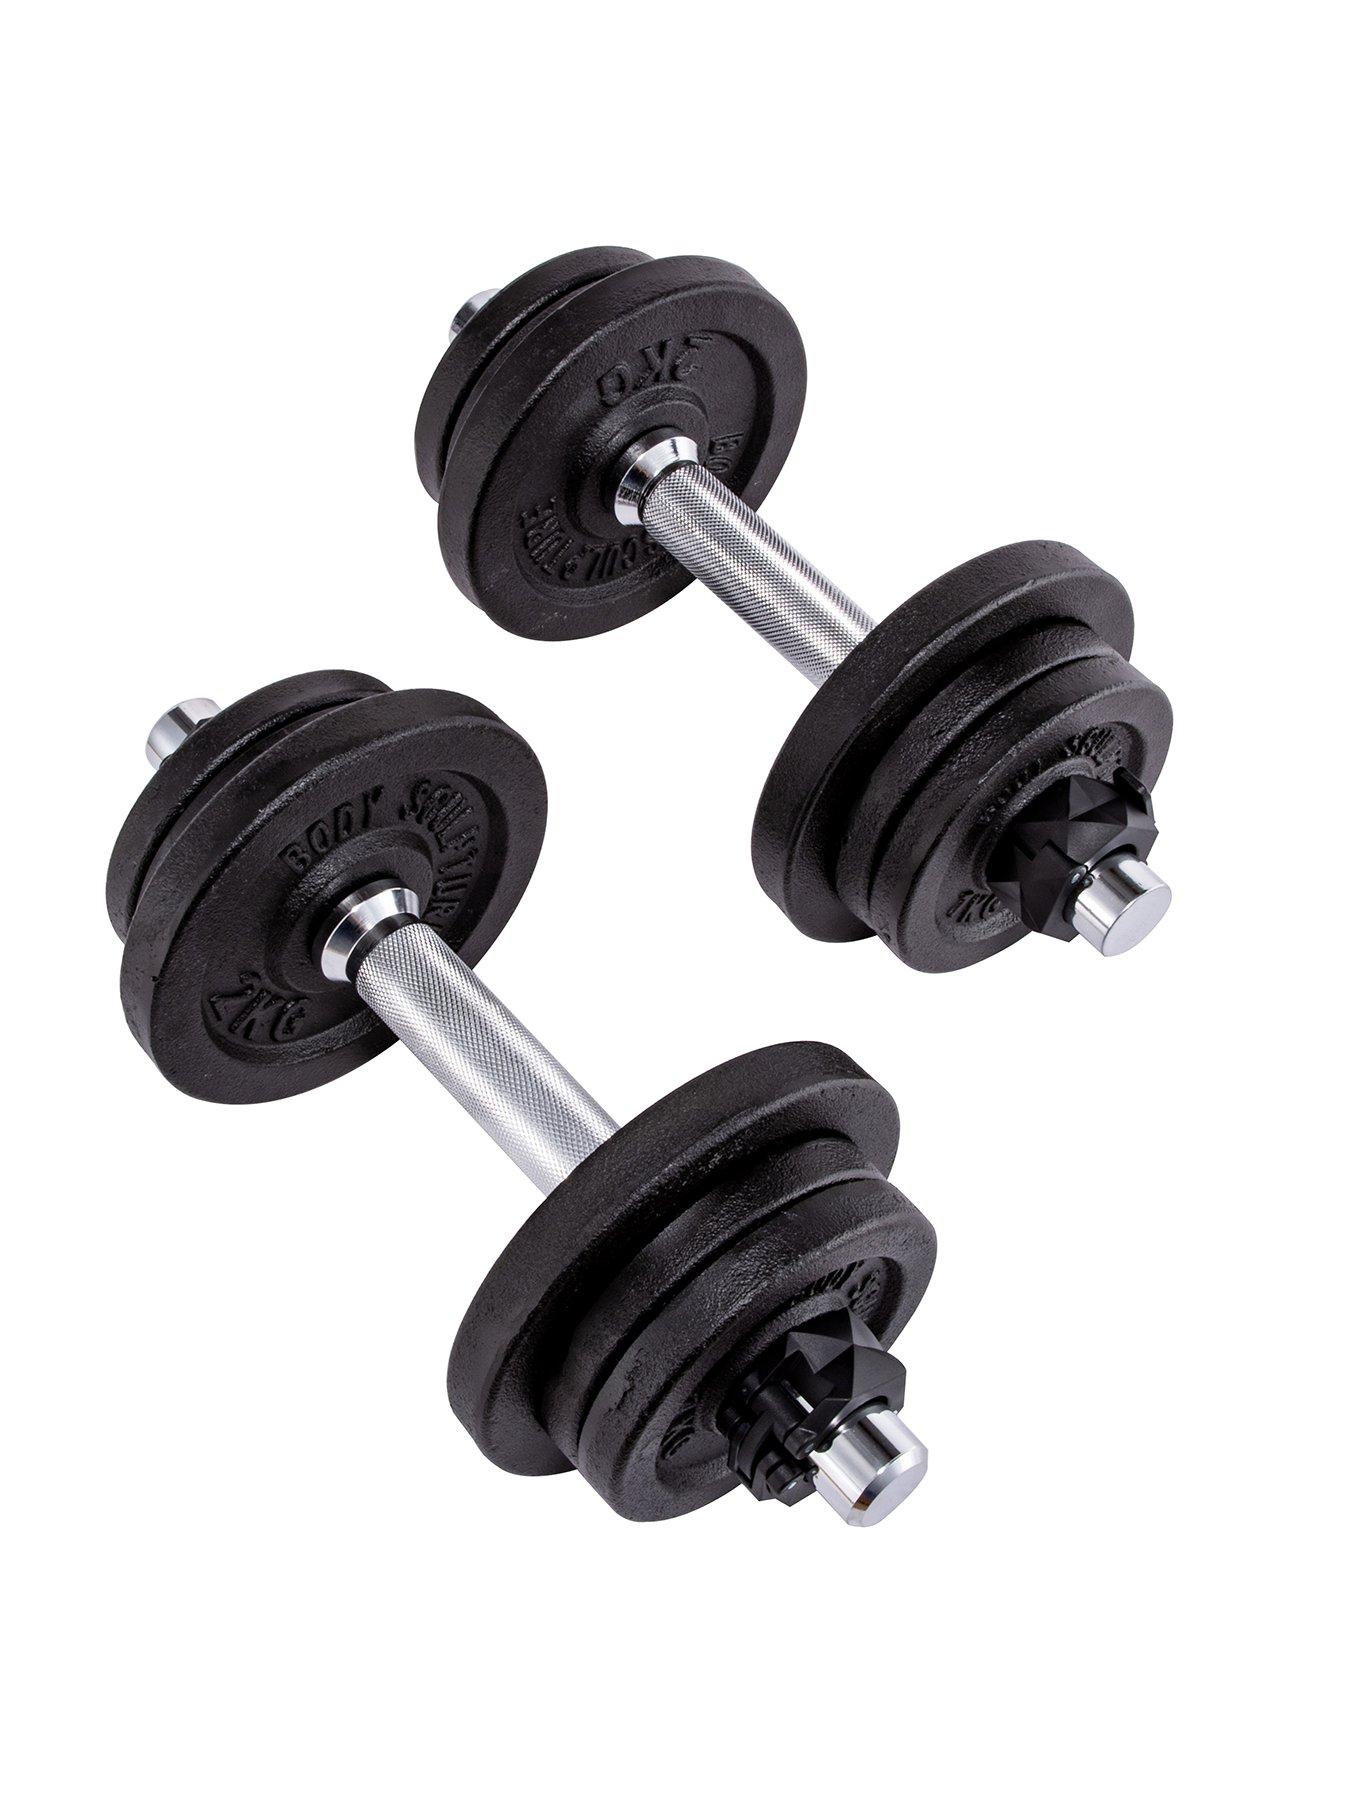 Details about   Single Neoprene Dumbbell Weight Suitable for Home and Gym Exercise 1KG 1.5KG 2KG 